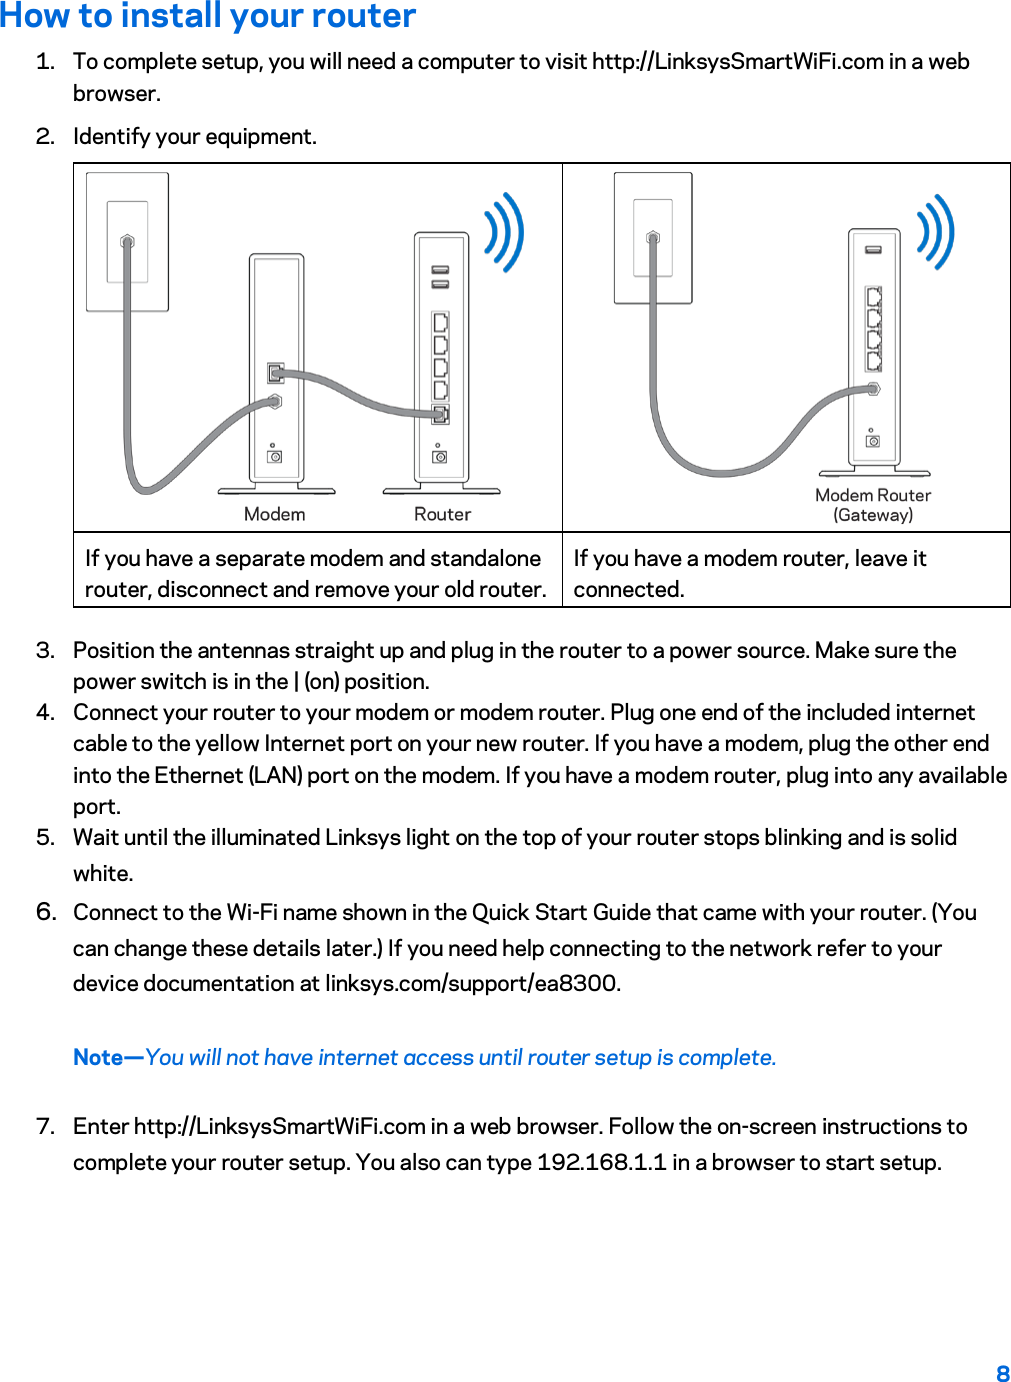 8  How to install your router 1. To complete setup, you will need a computer to visit http://LinksysSmartWiFi.com in a web browser. 2. Identify your equipment.   If you have a separate modem and standalone router, disconnect and remove your old router. If you have a modem router, leave it connected. 3. Position the antennas straight up and plug in the router to a power source. Make sure the power switch is in the | (on) position. 4. Connect your router to your modem or modem router. Plug one end of the included internet cable to the yellow Internet port on your new router. If you have a modem, plug the other end into the Ethernet (LAN) port on the modem. If you have a modem router, plug into any available port. 5. Wait until the illuminated Linksys light on the top of your router stops blinking and is solid white.  6. Connect to the Wi-Fi name shown in the Quick Start Guide that came with your router. (You can change these details later.) If you need help connecting to the network refer to your device documentation at linksys.com/support/ea8300. Note—You will not have internet access until router setup is complete. 7. Enter http://LinksysSmartWiFi.com in a web browser. Follow the on-screen instructions to complete your router setup. You also can type 192.168.1.1 in a browser to start setup. 